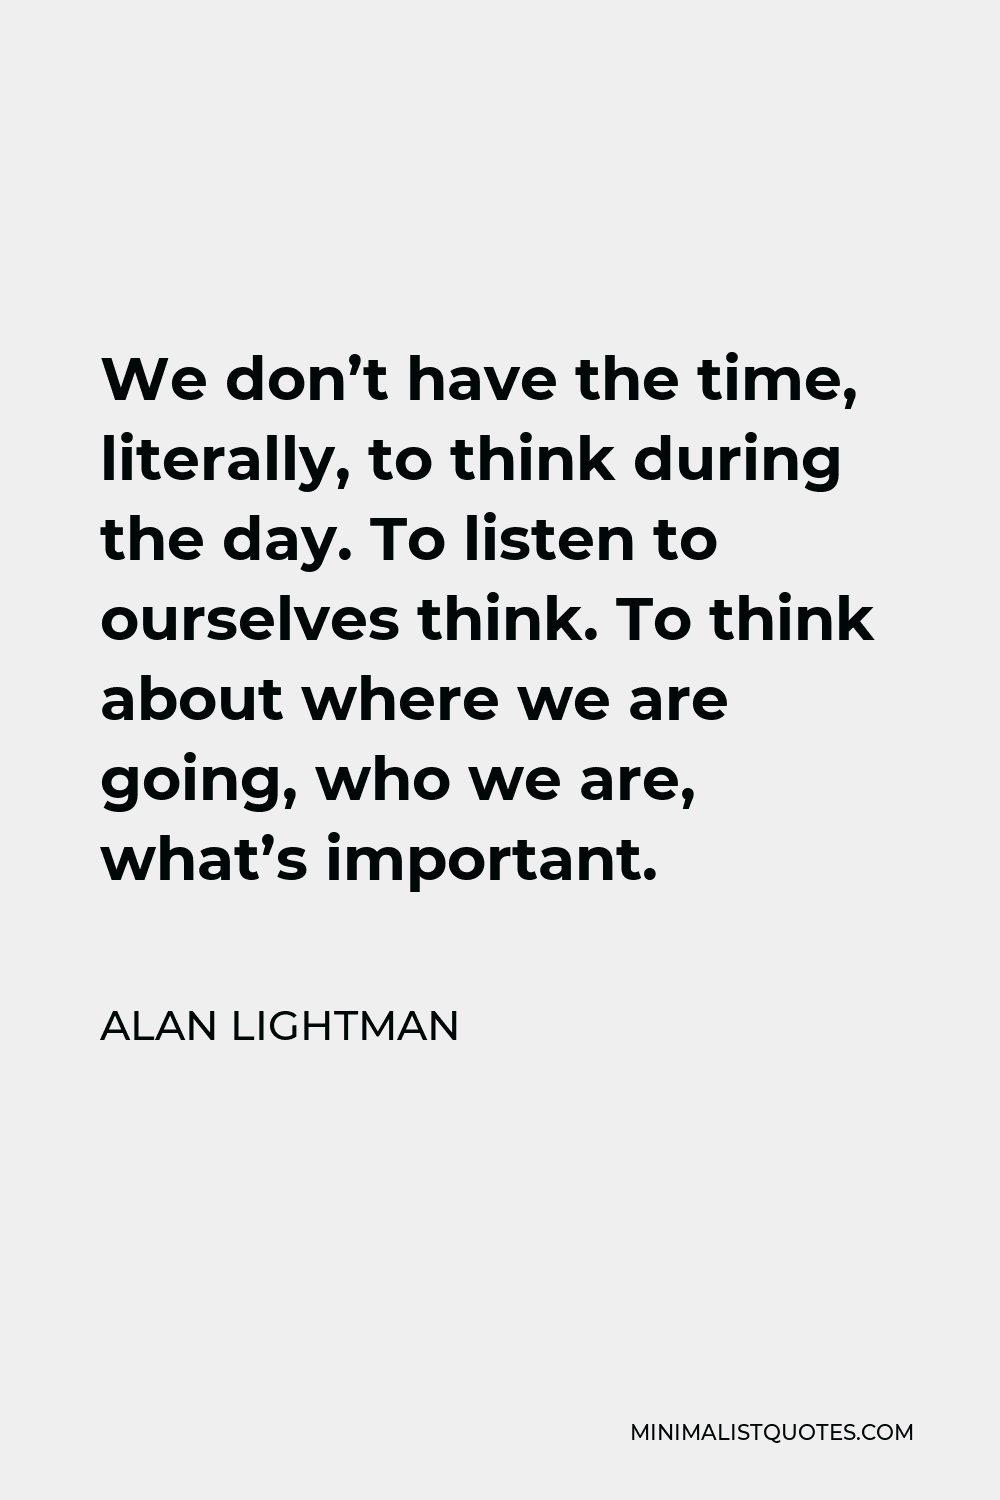 Alan Lightman Quote - We don’t have the time, literally, to think during the day. To listen to ourselves think. To think about where we are going, who we are, what’s important.